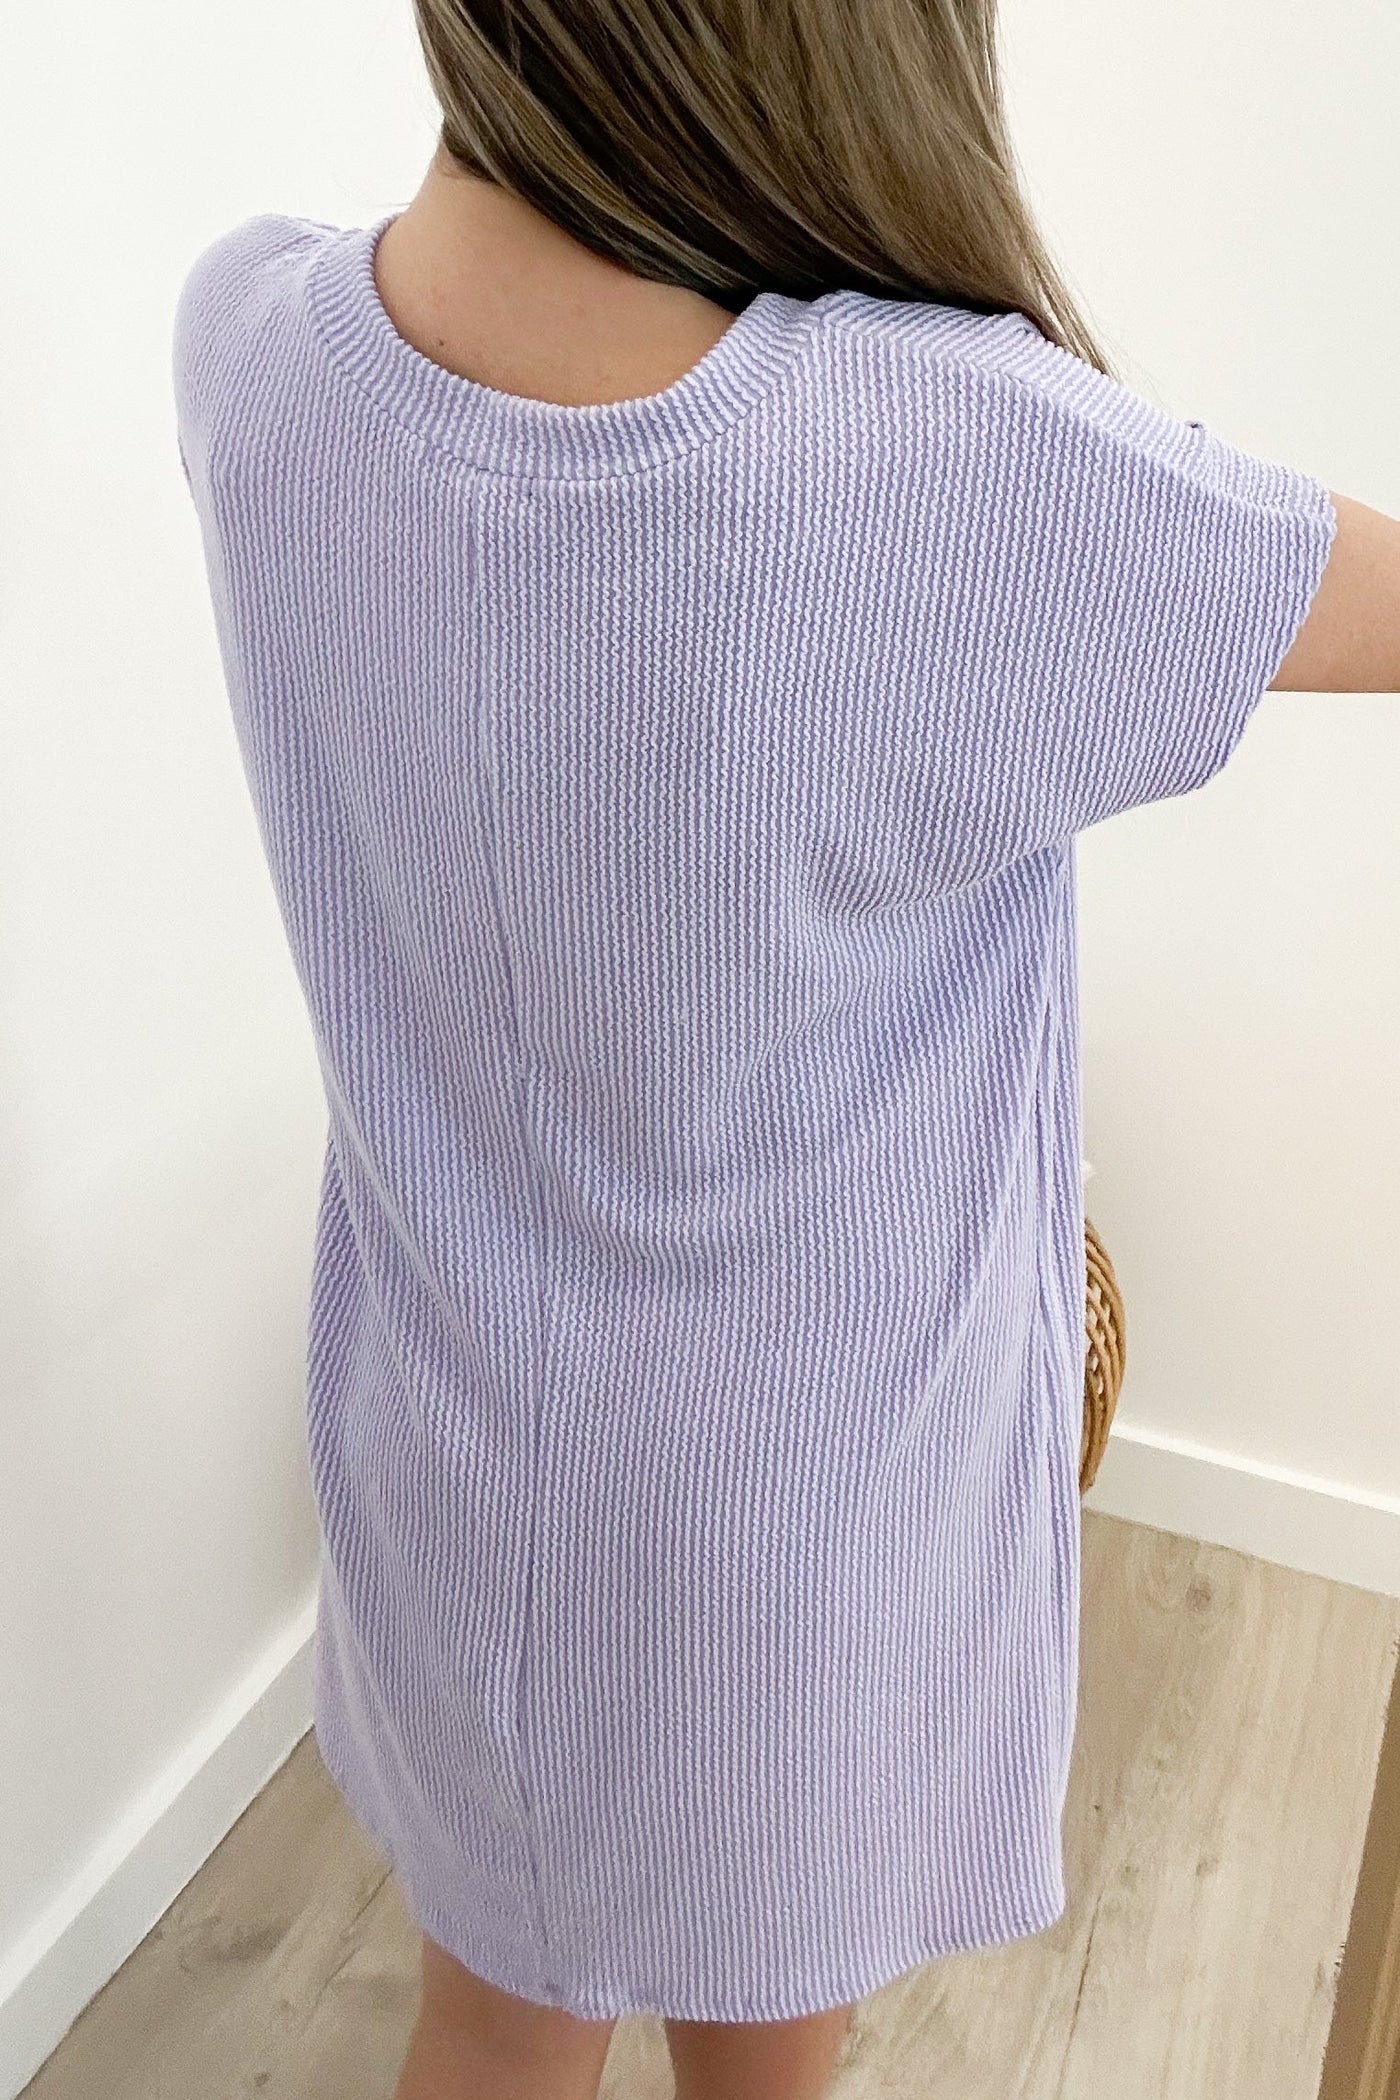 "Ribbed & Relaxed" Dress (Lavender) - Happily Ever Aften